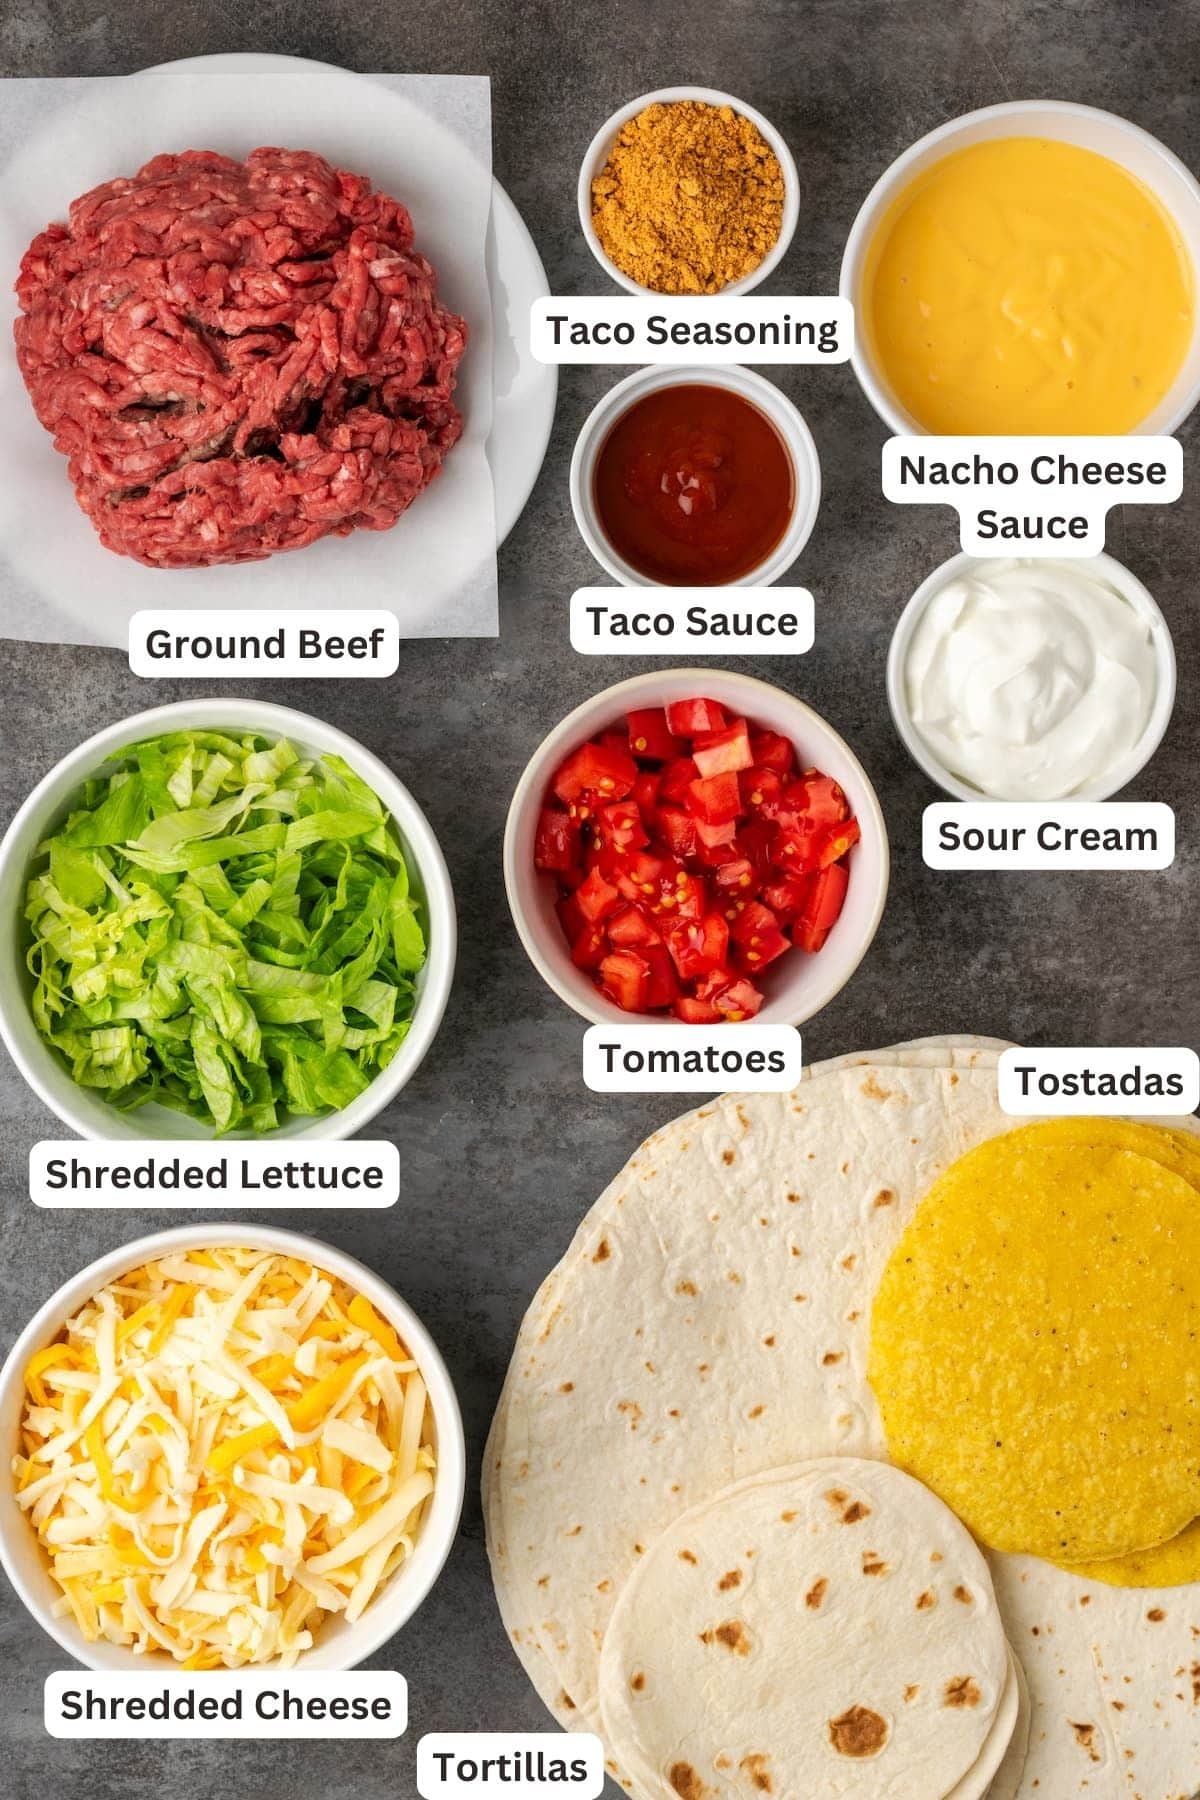 Ingredients for Crunch Wraps recipe.